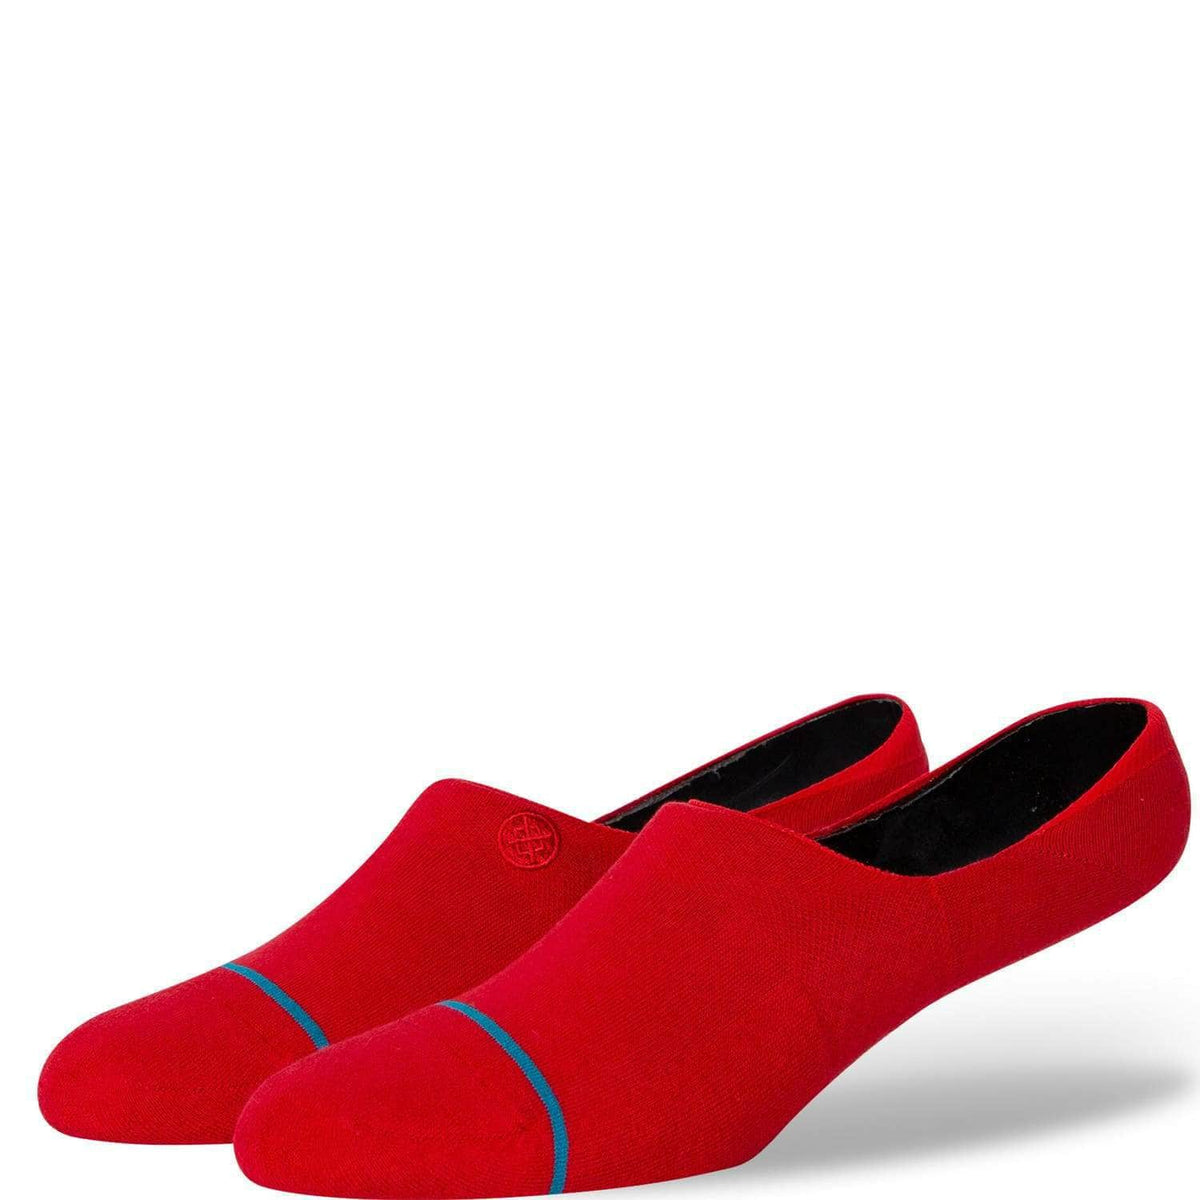 Stance Icon No Show Invisible Socks - Red - Unisex Invisible/No Show Socks by Stance L (UK8-12.5)